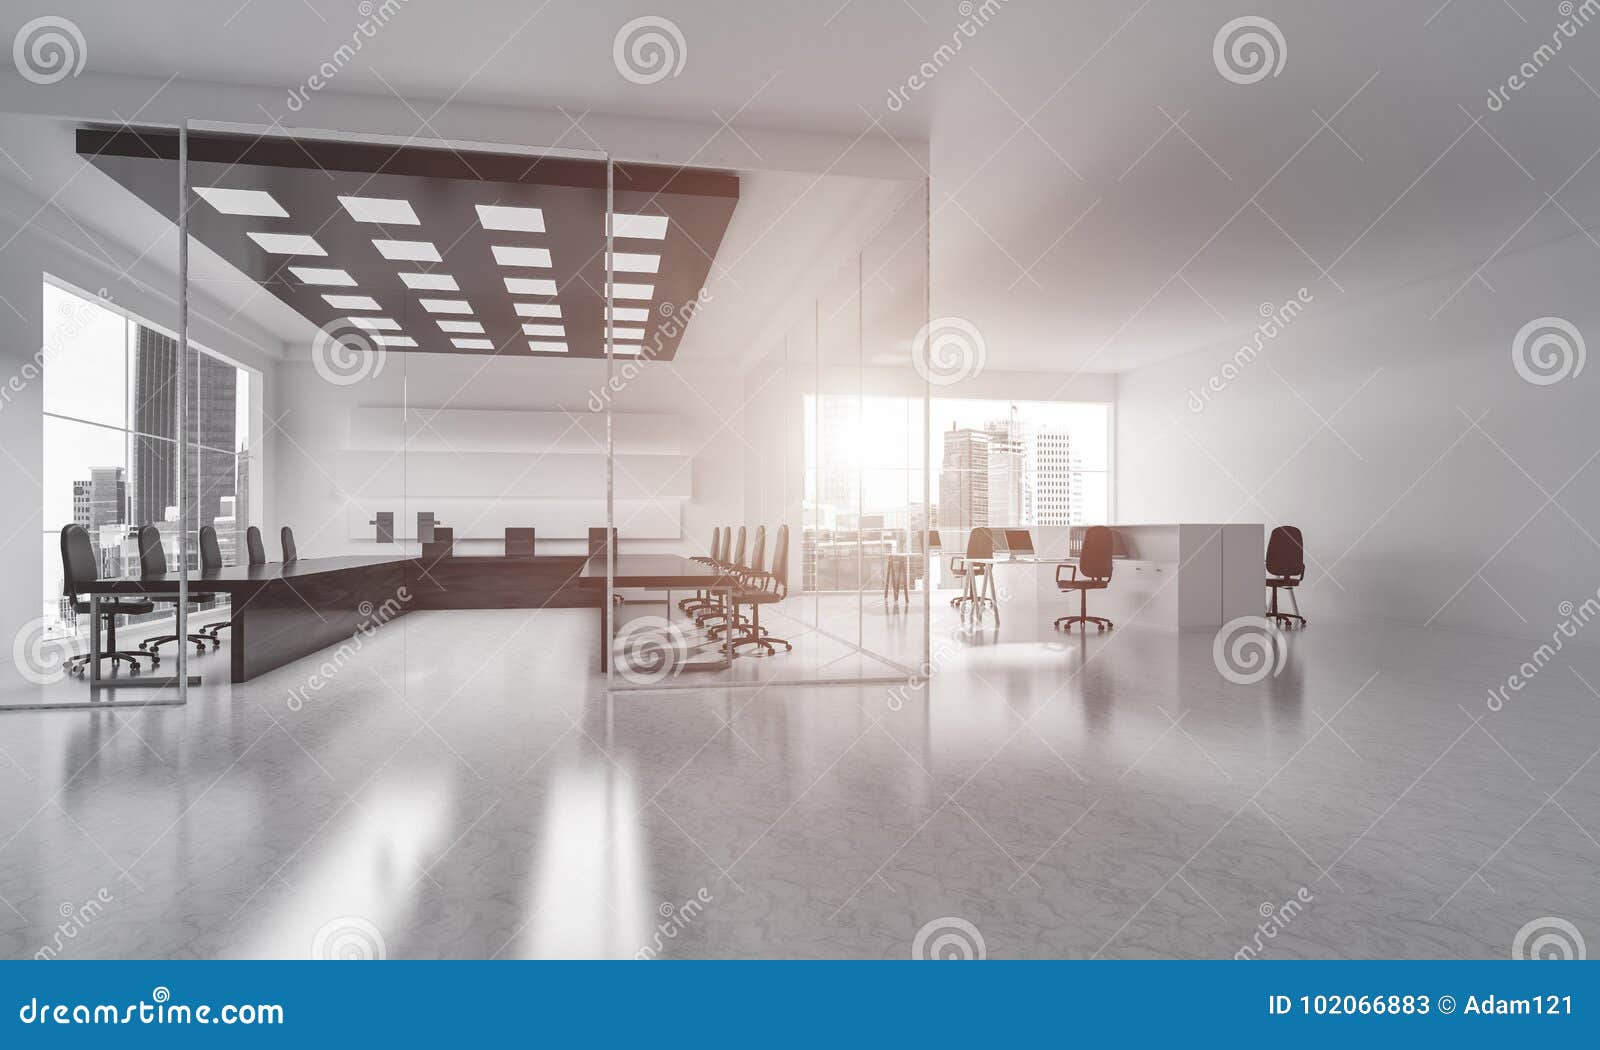 Office Interior Design In Whire Color And Rays Of Light From